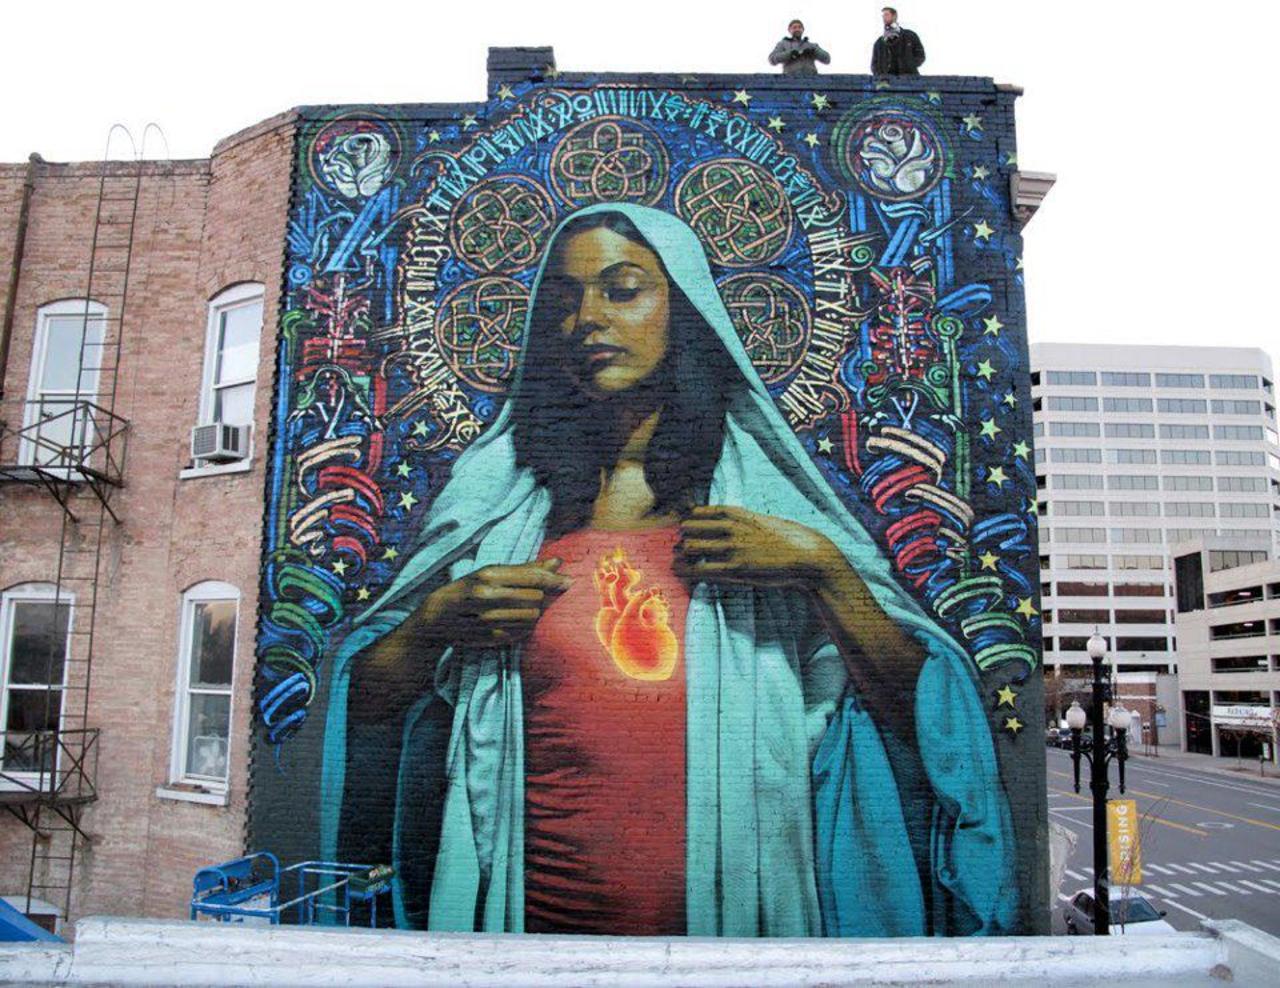 Amazing piece by El Mac & Retna in Salt Lake City. Discover more: http://bit.ly/1sGpf6z #beautiful #streetart https://t.co/yC31RbcoFN